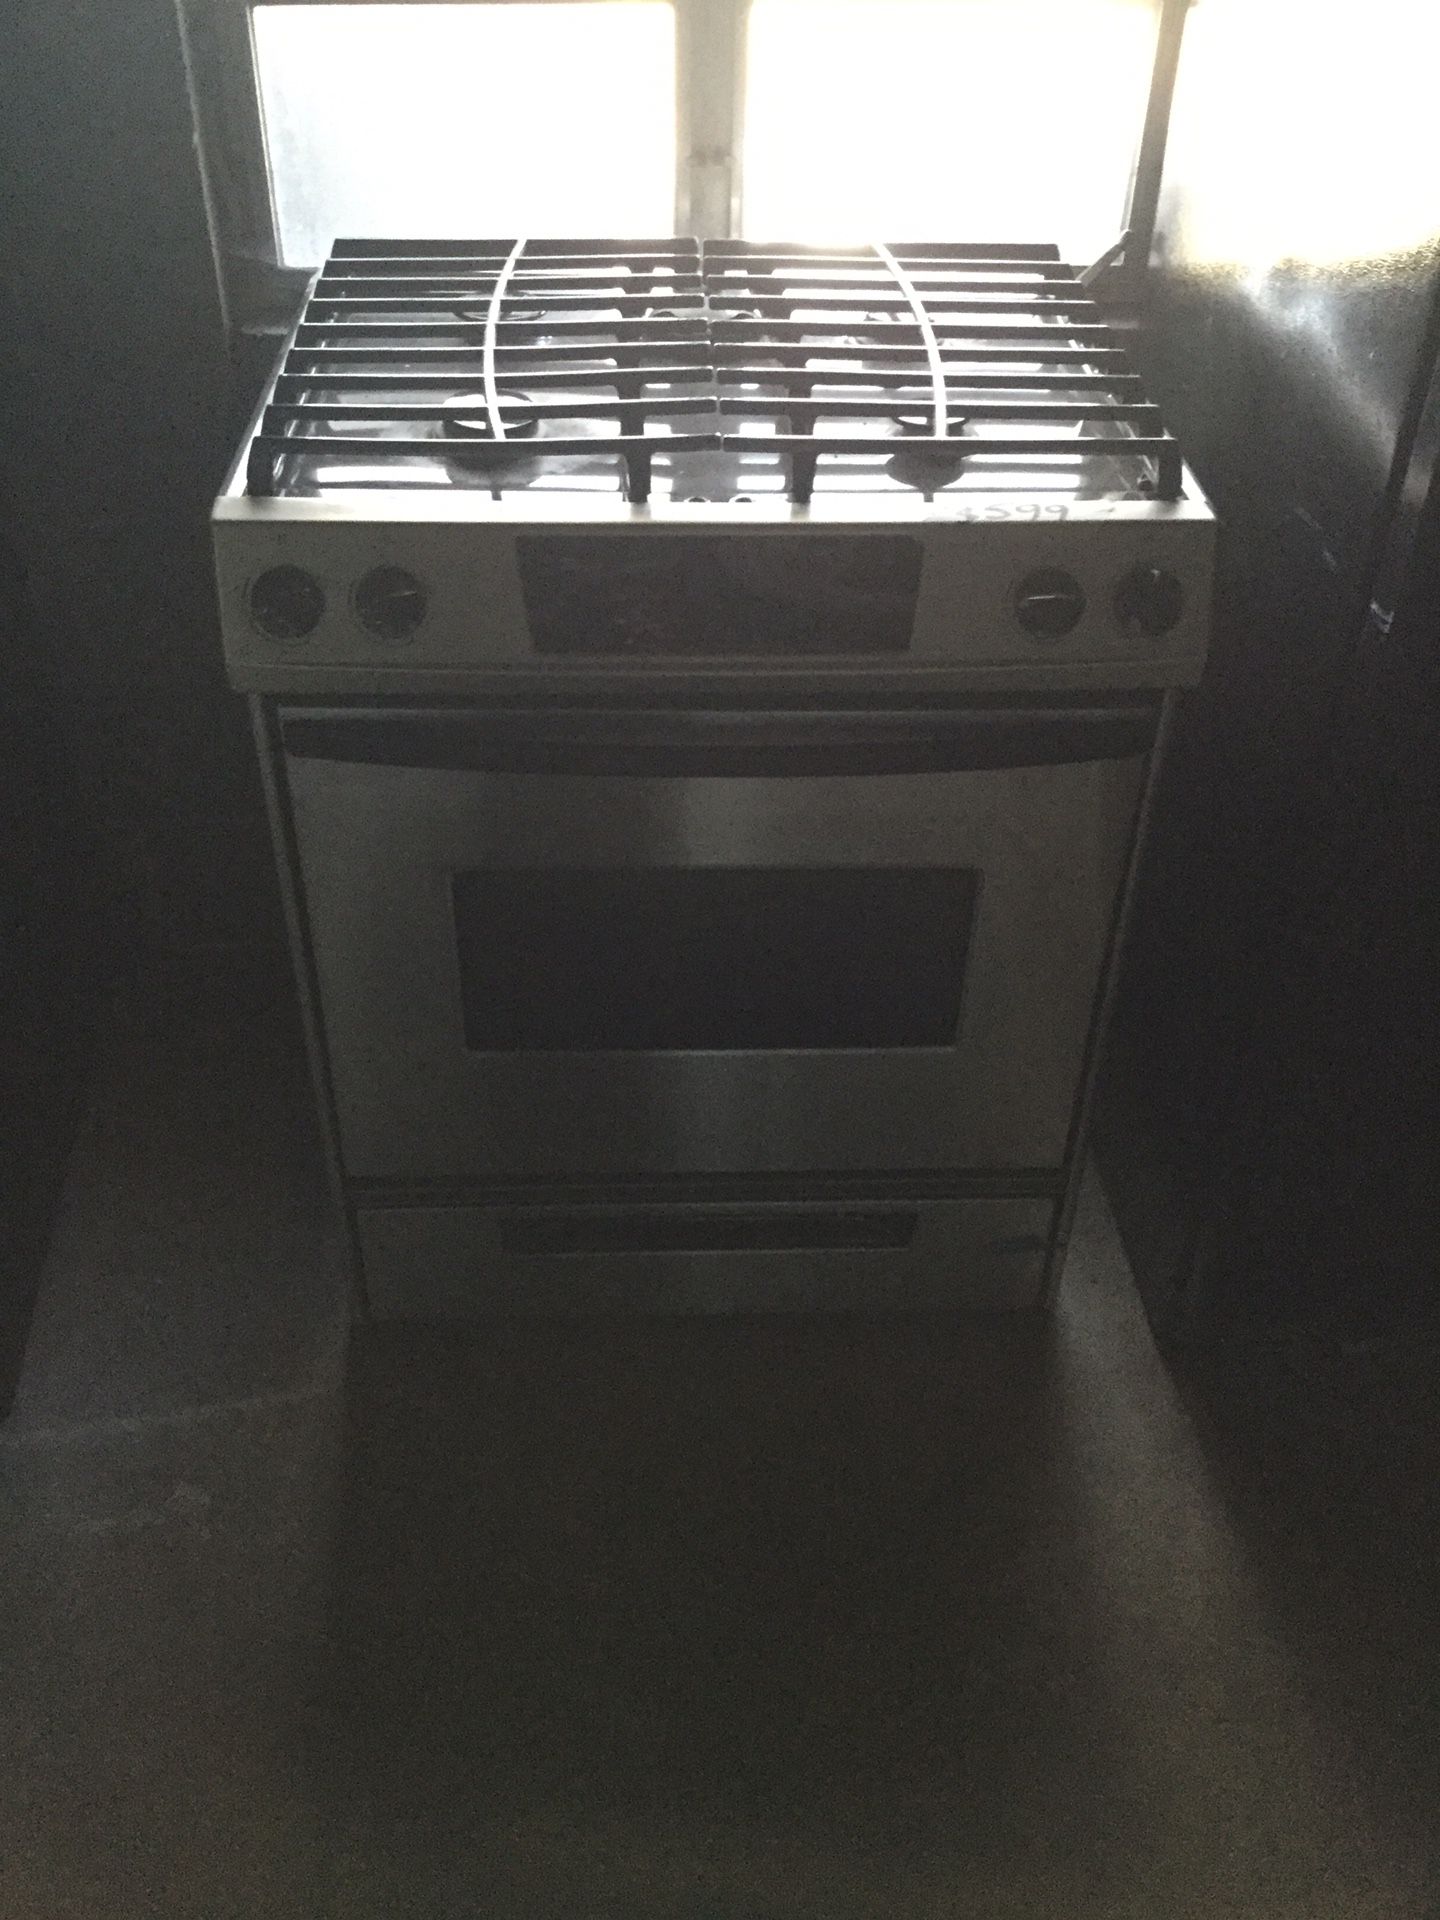 Whirlpool gas stainless range with downdraft/ 30 day warranty/ delivery available